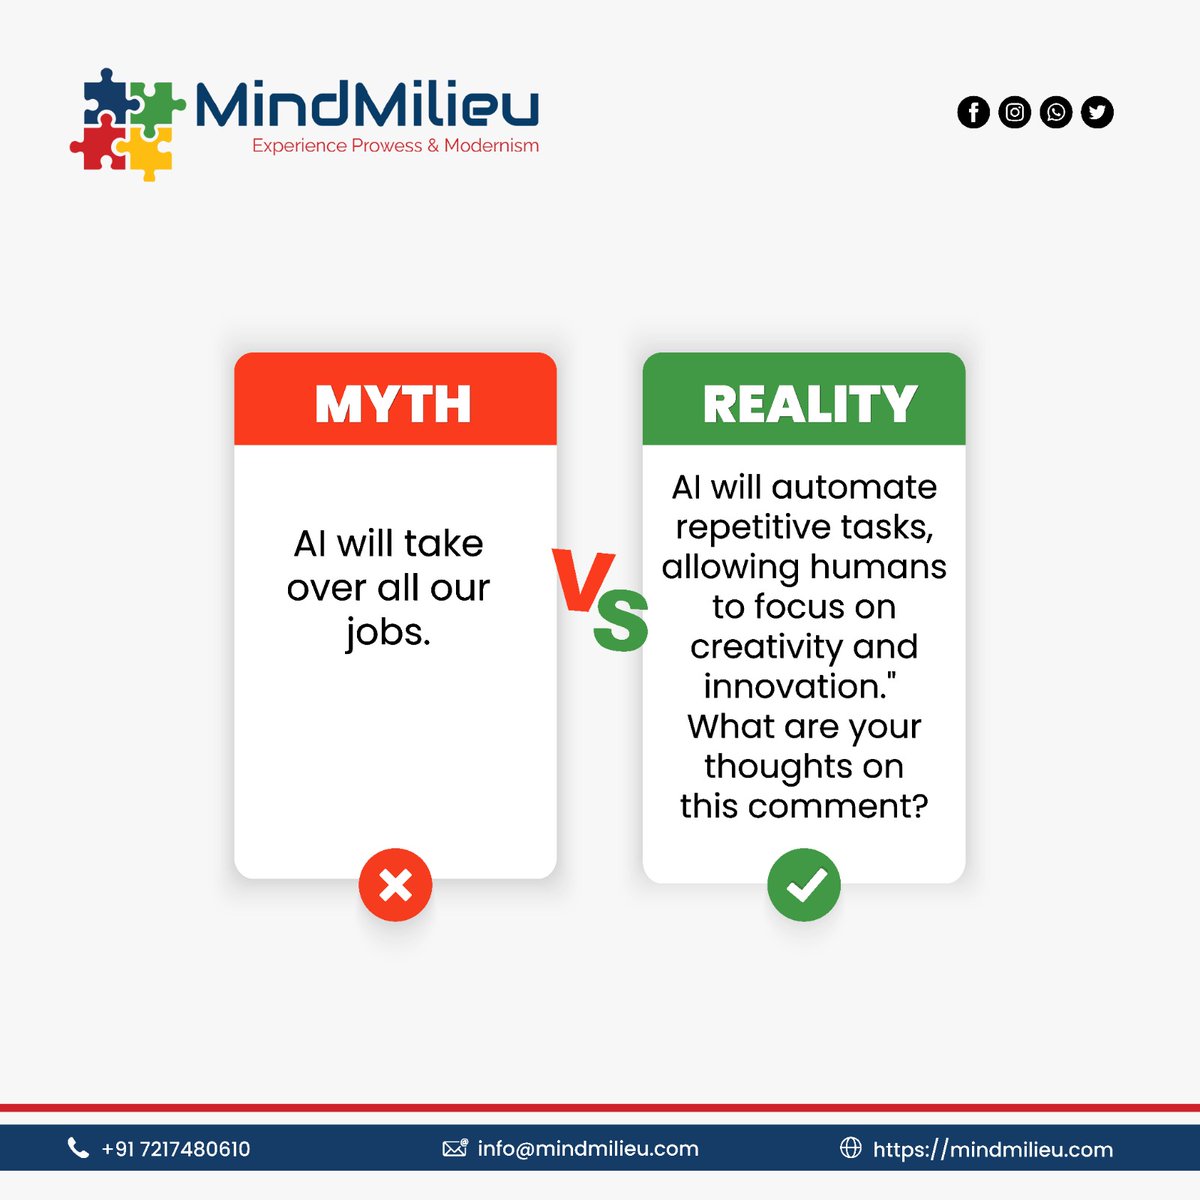 Myth: AI spells doom for jobs! 😰
Reality: AI liberates us from mundane tasks, empowering us to soar with creativity and innovation! 🚀💡

Embrace the AI revolution as a catalyst for human ingenuity! 💪 
.
.
#AI #Innovation #FutureOfWork #futureofai